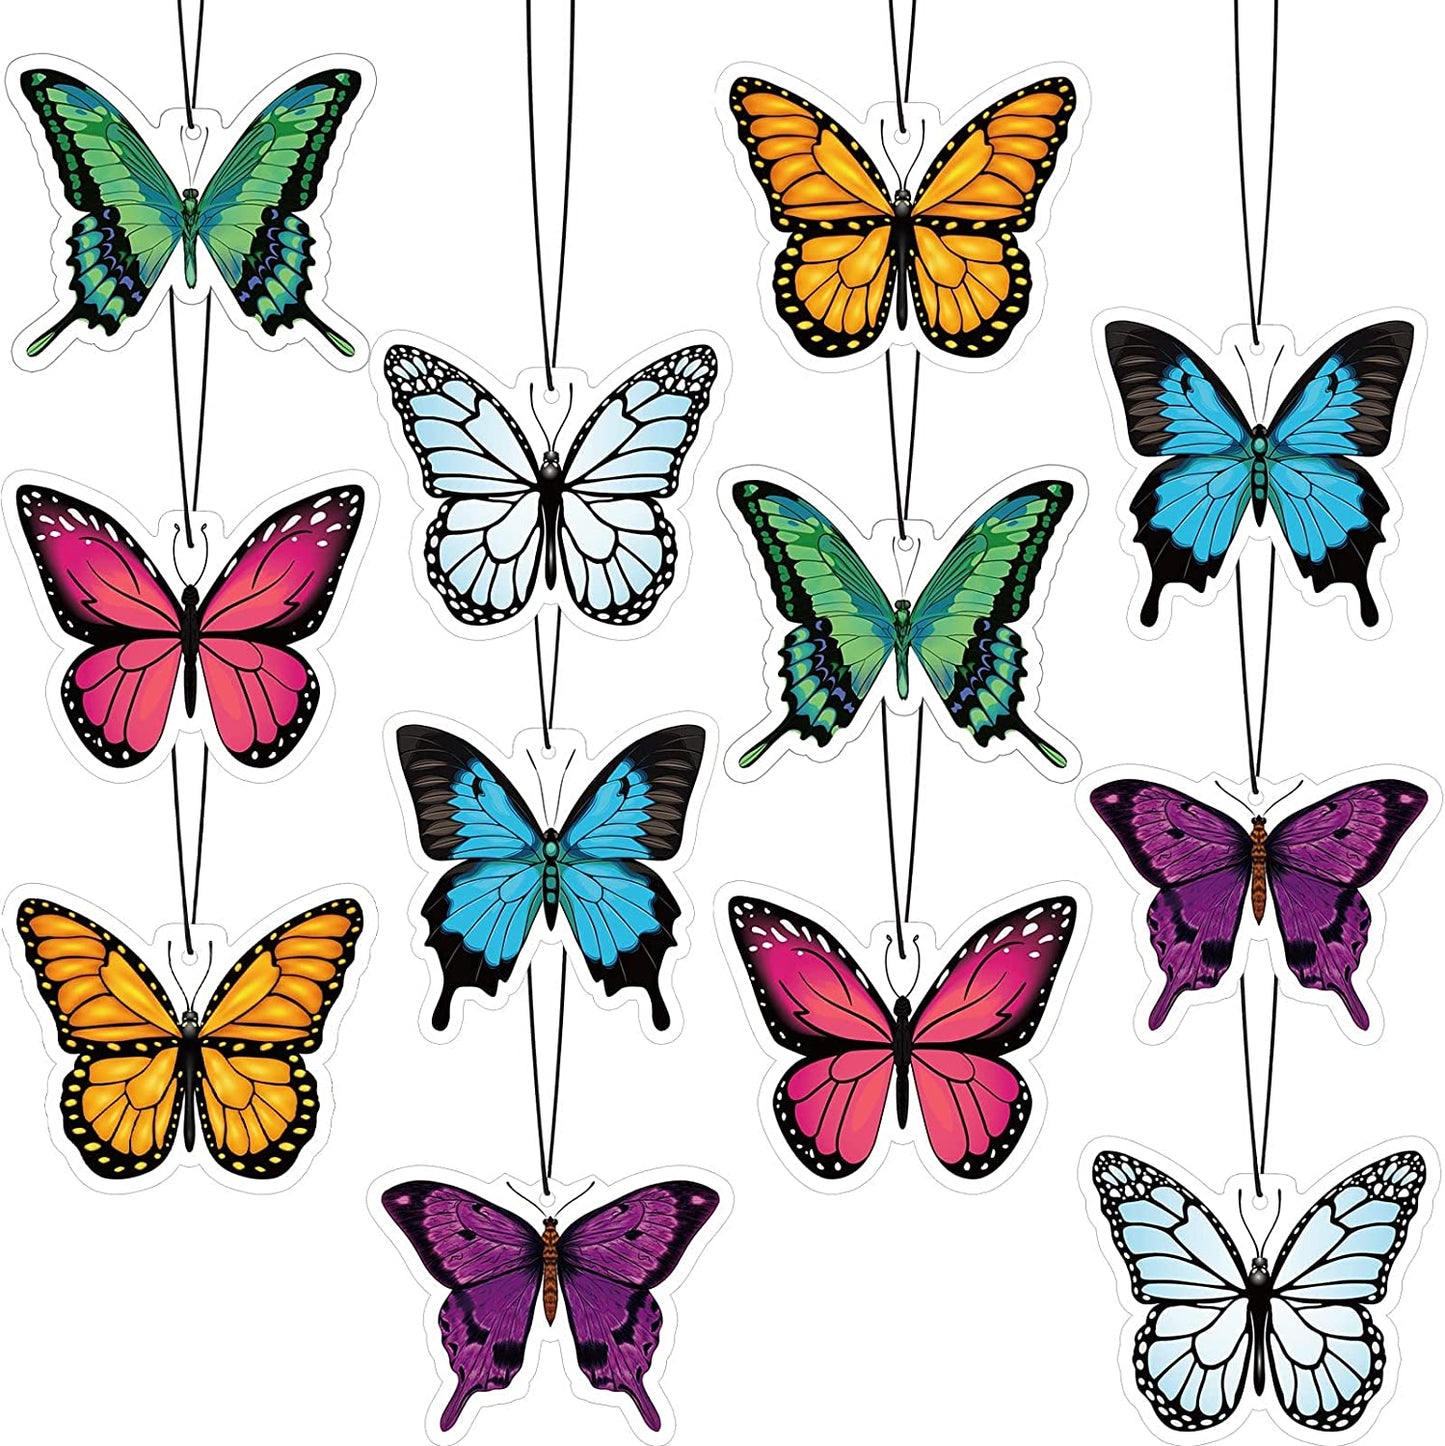 Bulk Butterfly Car Air Fresheners Summer Flower Hanging Air Fresheners for Cars, Bedrooms, Restrooms